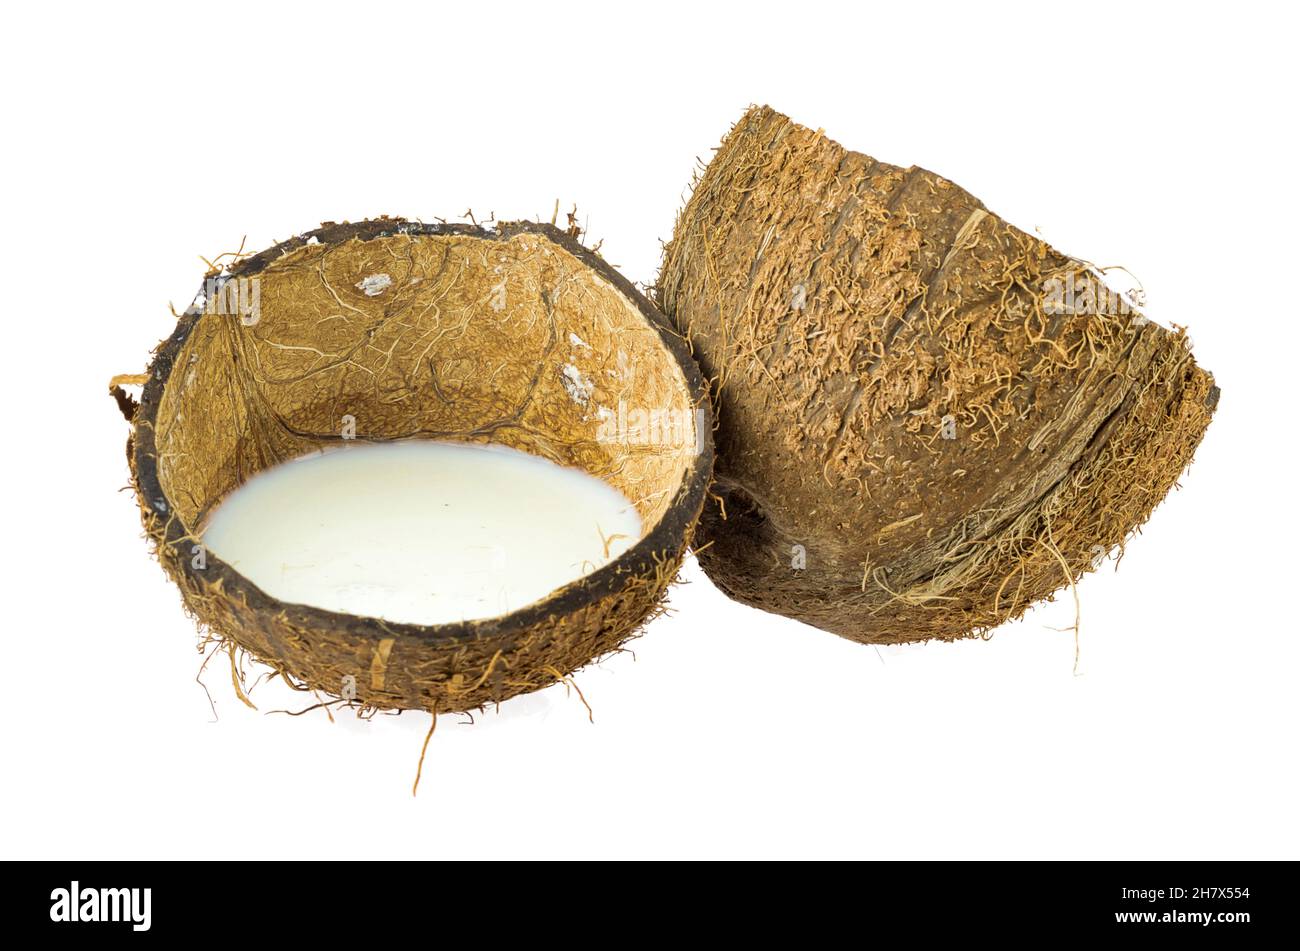 Coconut Shell Isolated on White Background. Stock Photo